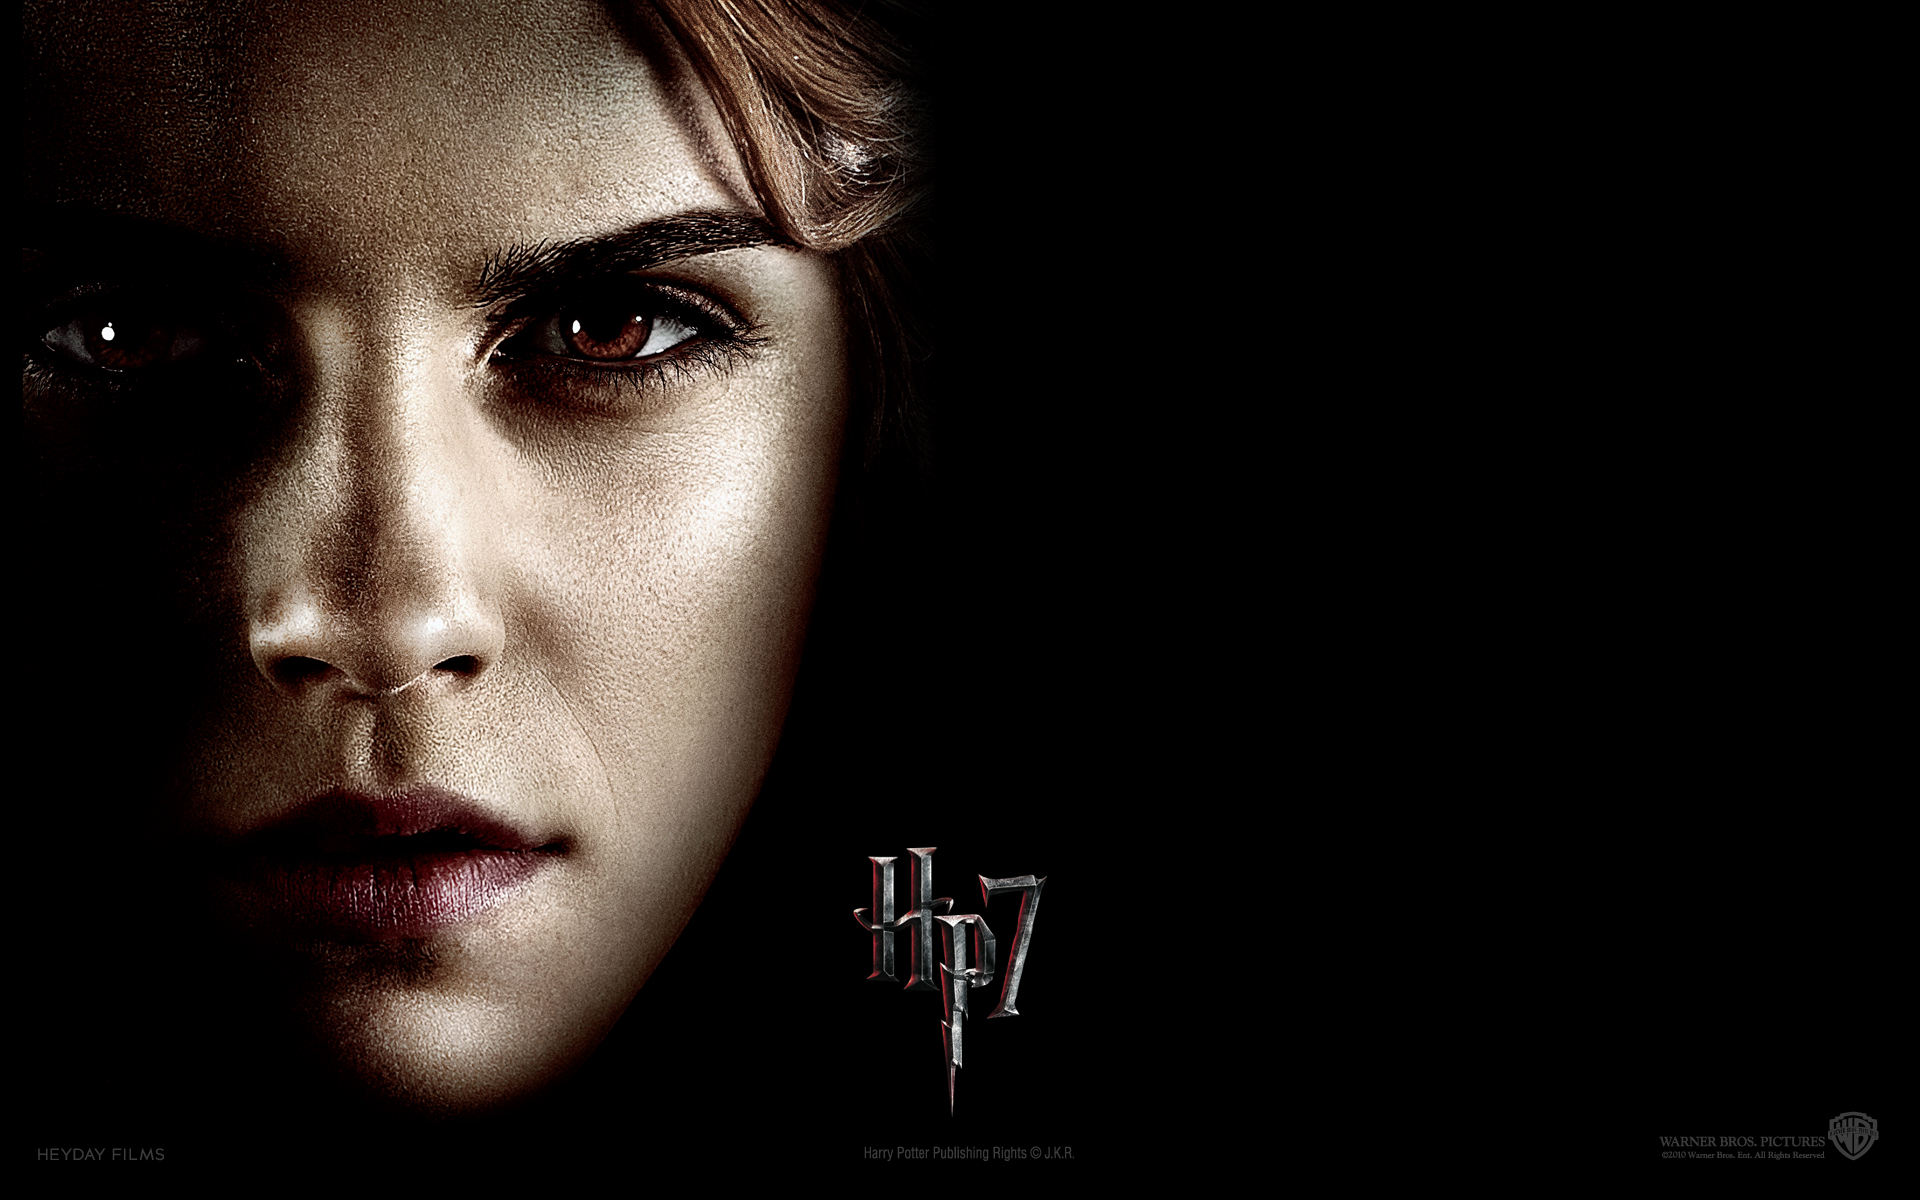 emma watson, harry potter, movie, harry potter and the deathly hallows: part 1, hermione granger, harry potter and the deathly hallows